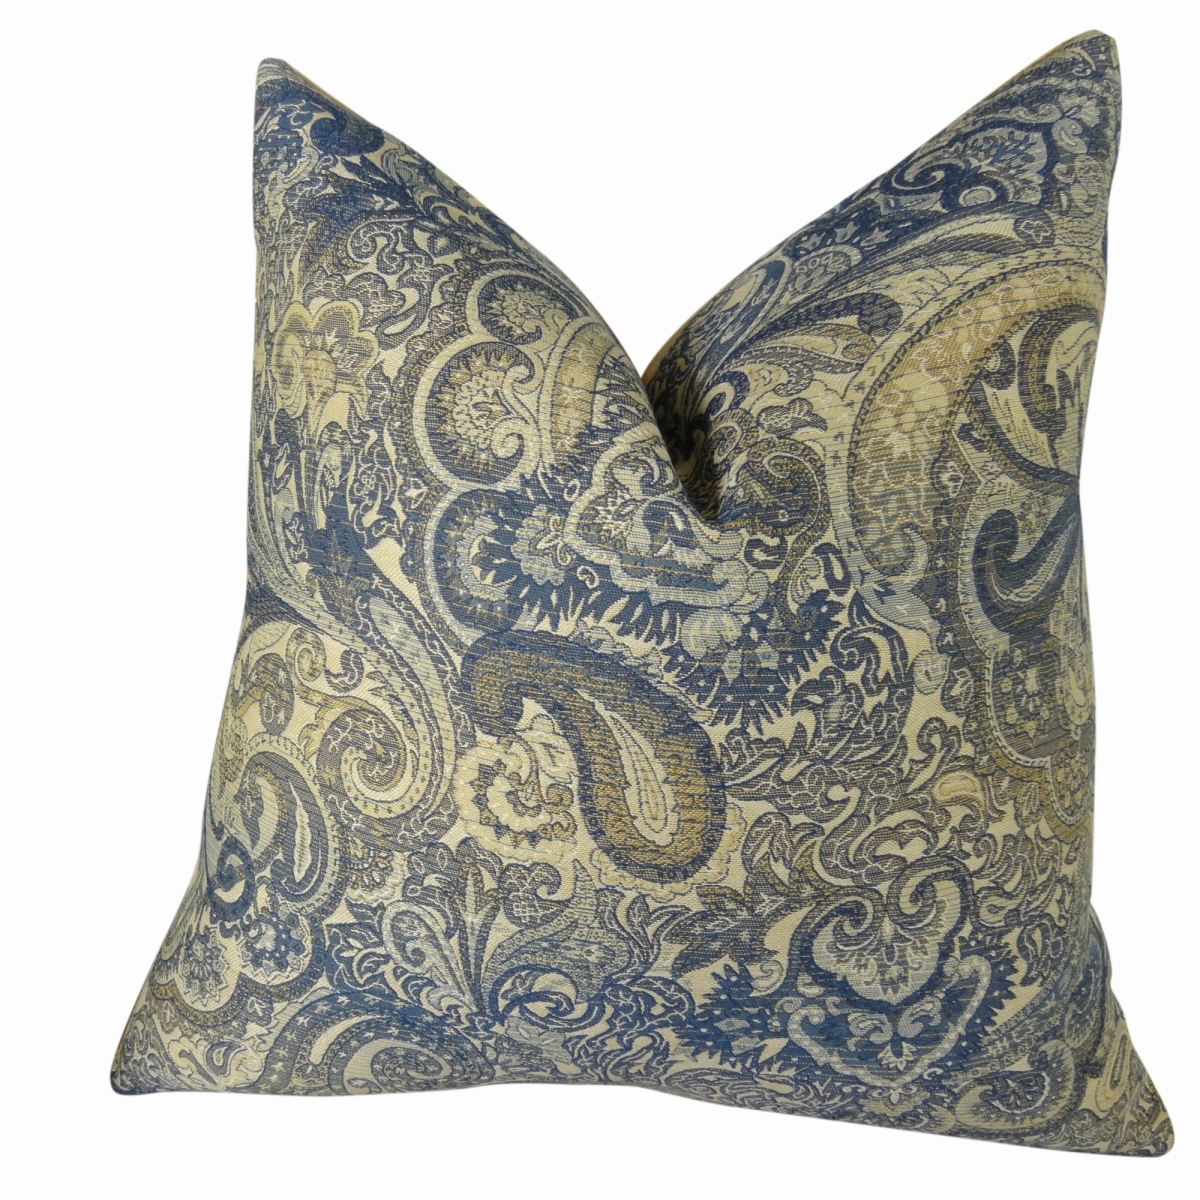 Paciotti Handmade Double Sided Throw Pillow - Navy - Blue & Taupe - 20 x 20 in -  DwellingDesigns, DW3132111